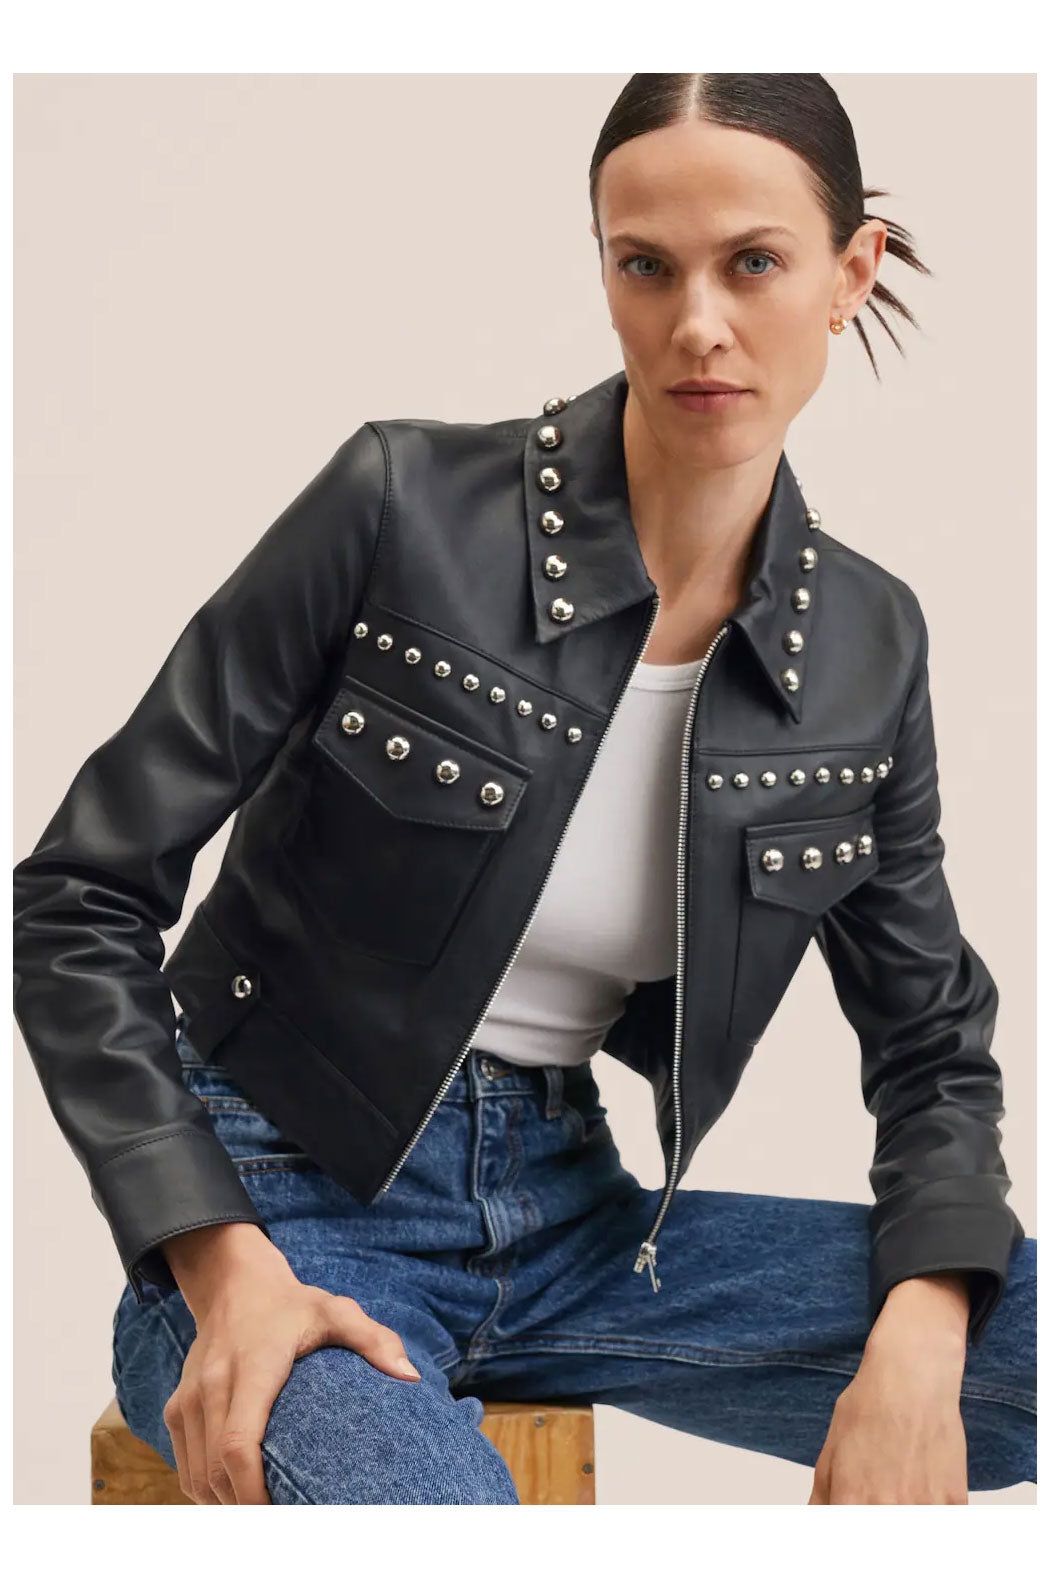 New Women Black Style Silver Spiked Studded Motorcycle Leather Biker Jacket